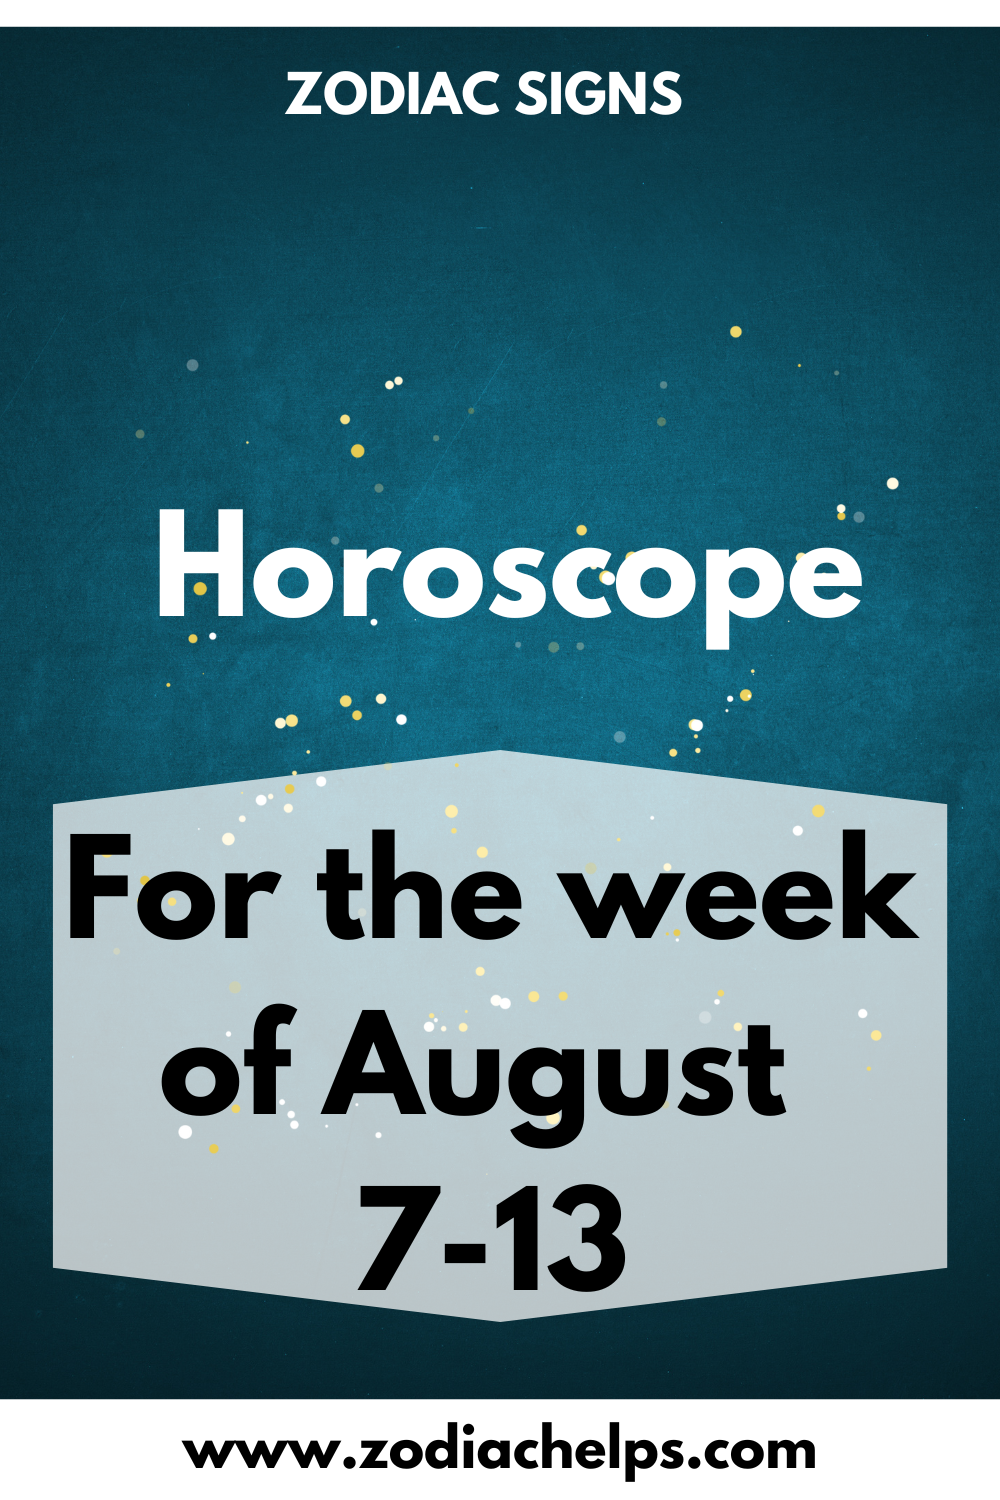 Horoscope for the week of August 7-13.